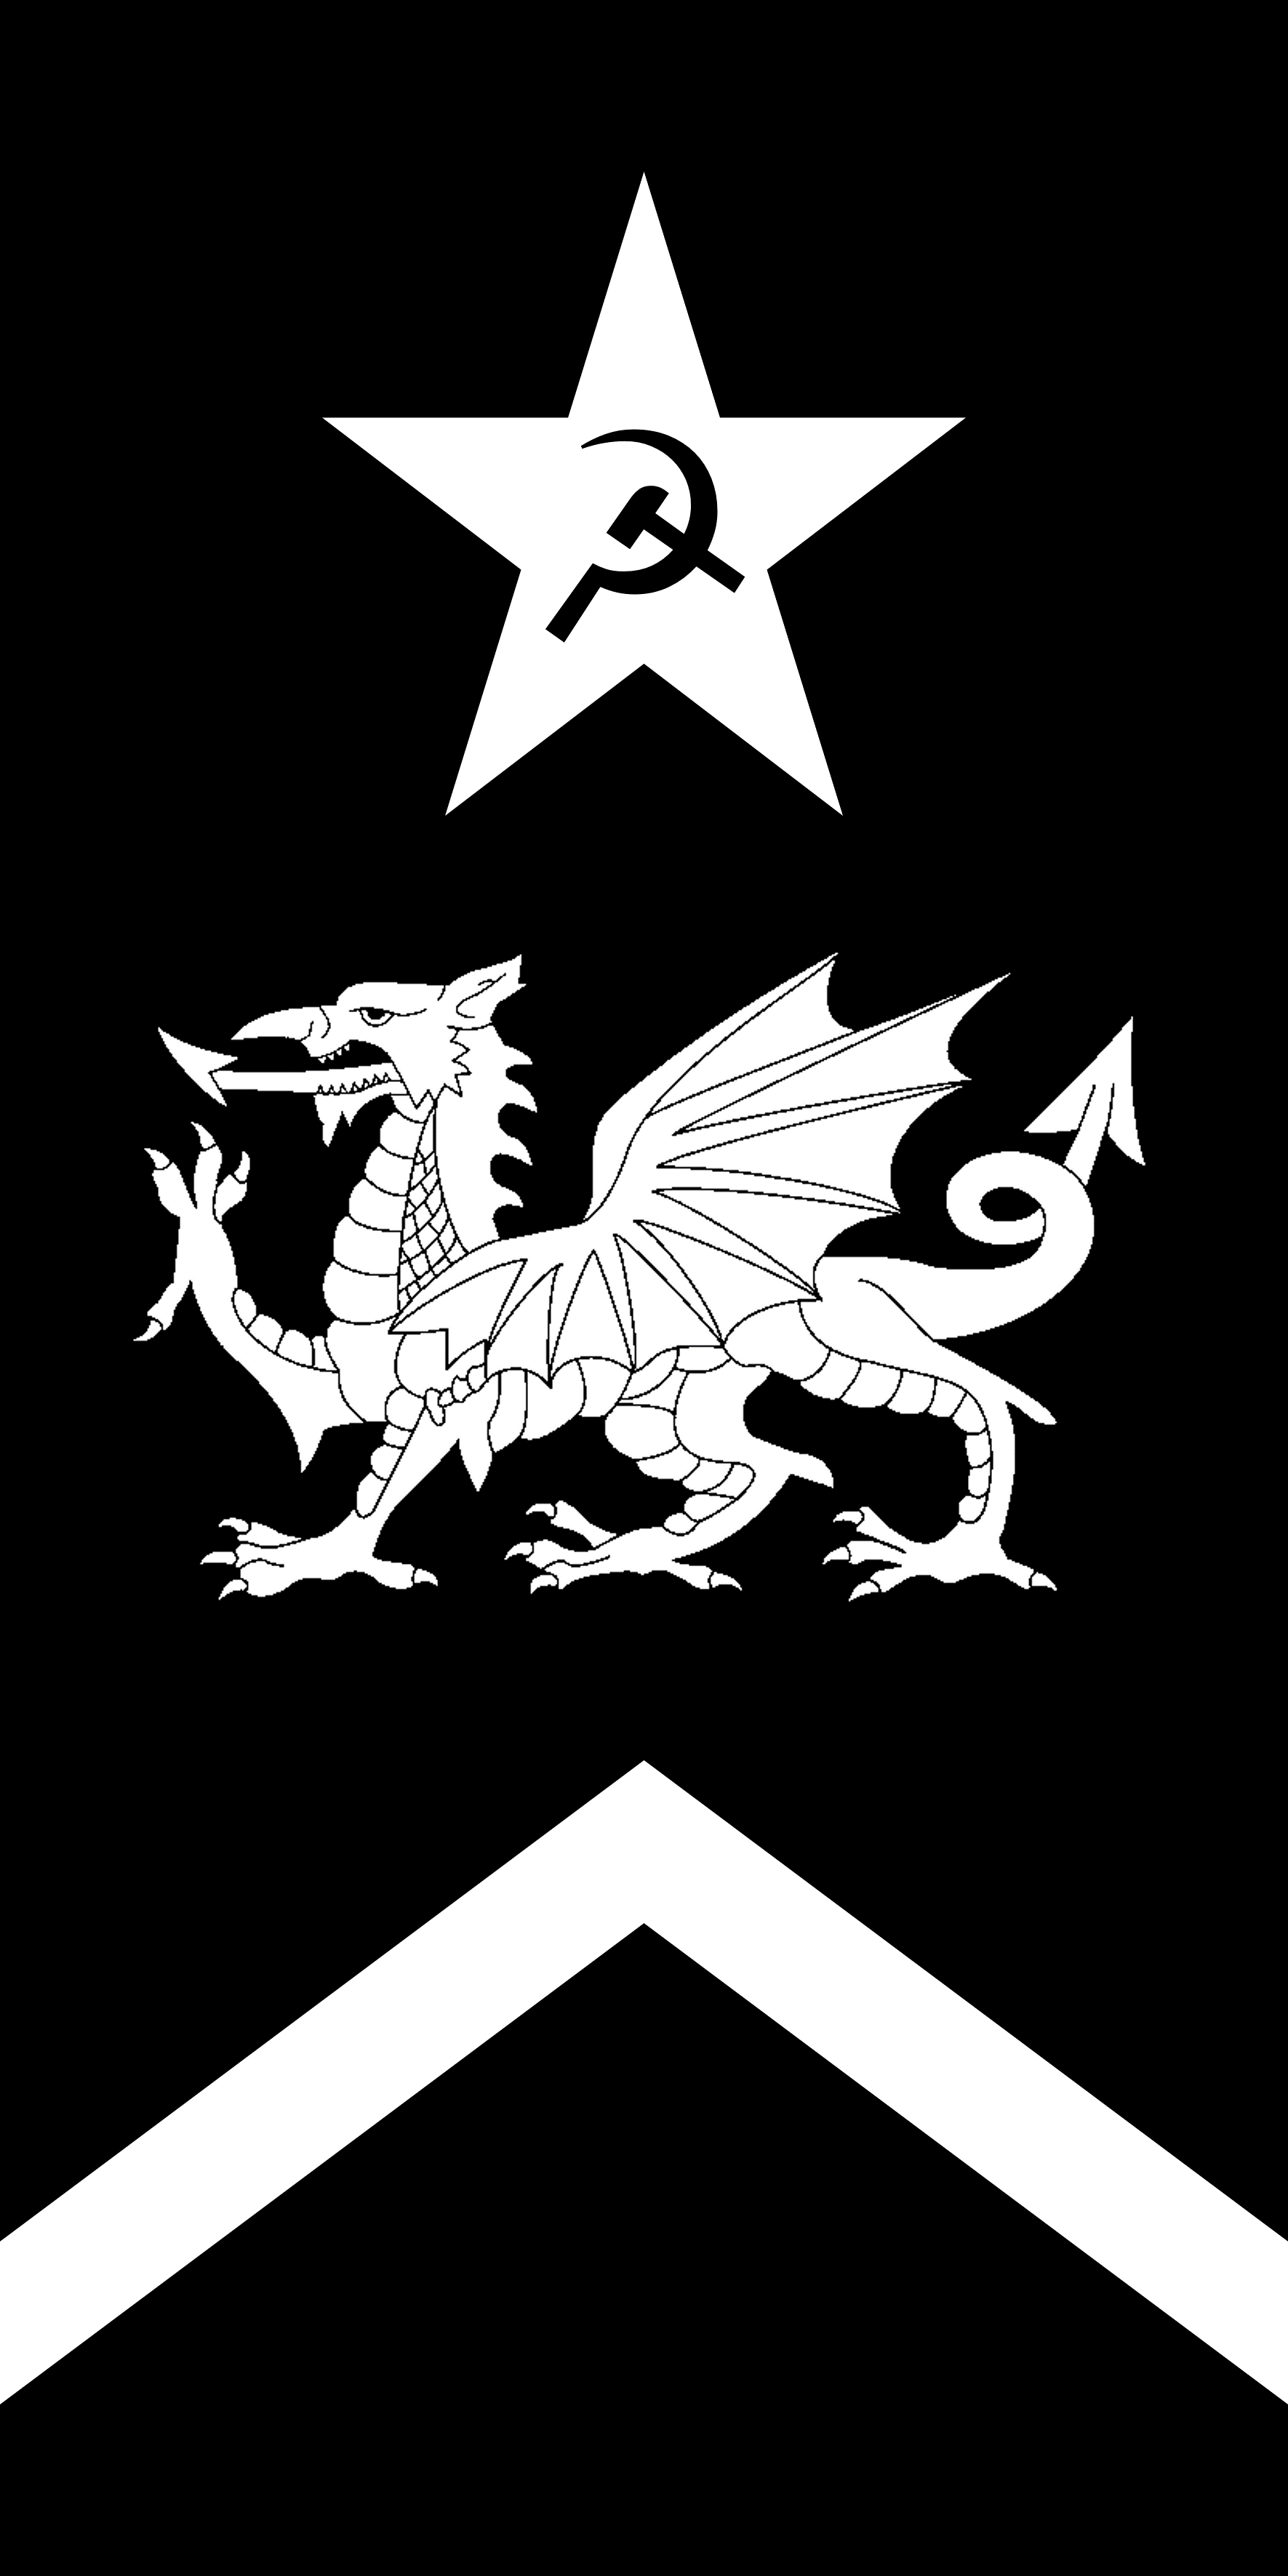 A black flag taller than it is wide showing: a black hammer and sickle within a white star at the top of the flag; a white dragon in the middle of the flag; and a white chevron pointing up near the base of the flag